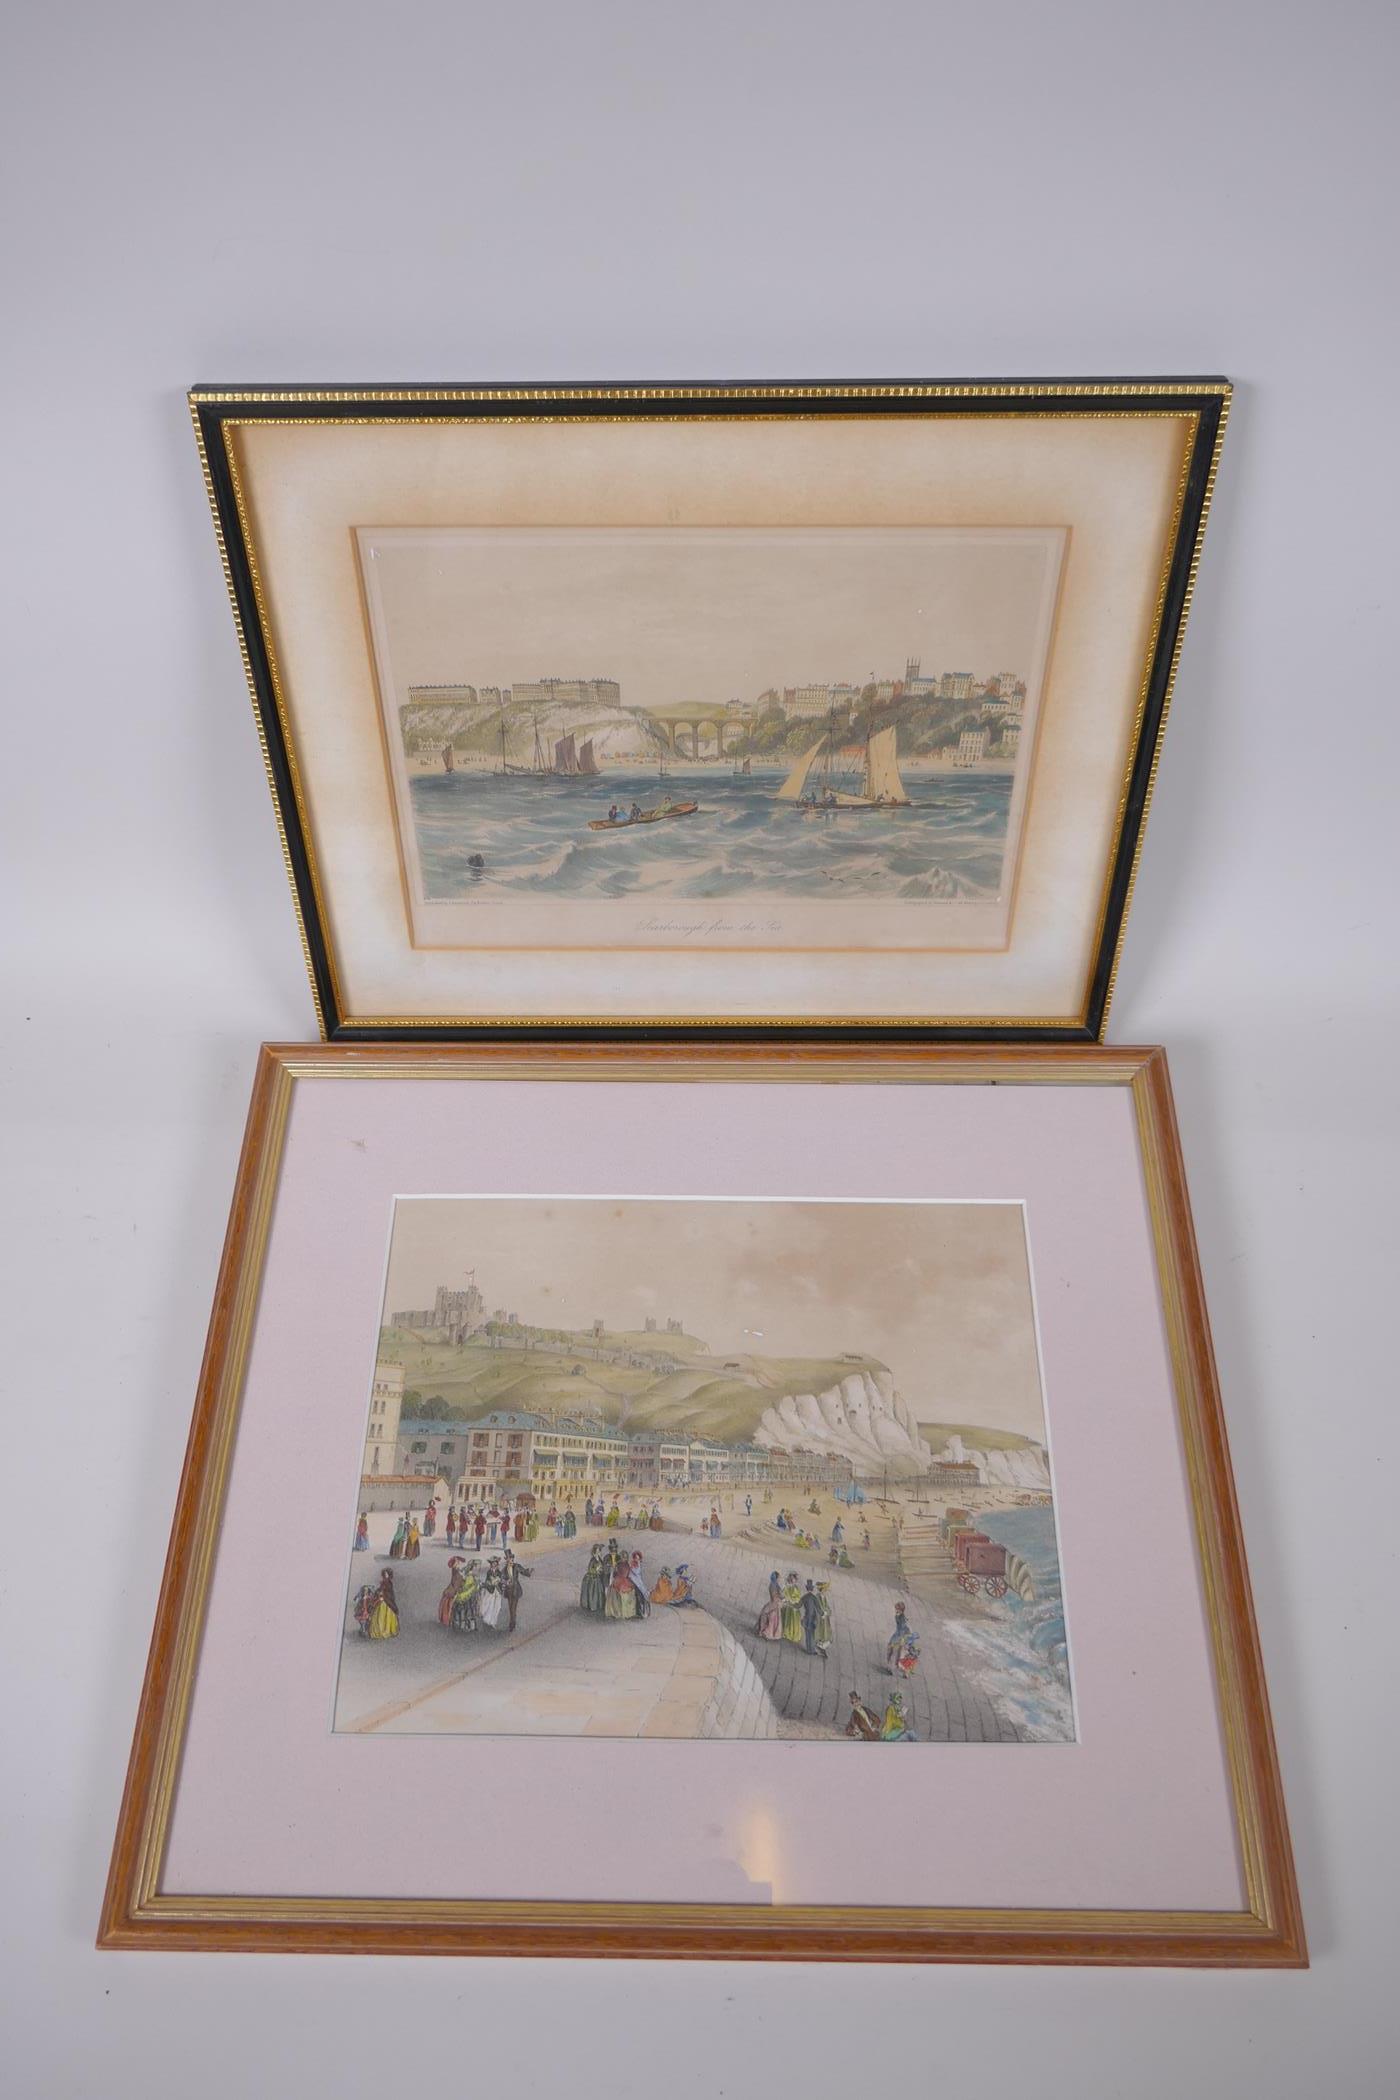 A C19th hand coloured lithograph, Scarborough from the Sea, and another similar depicting the